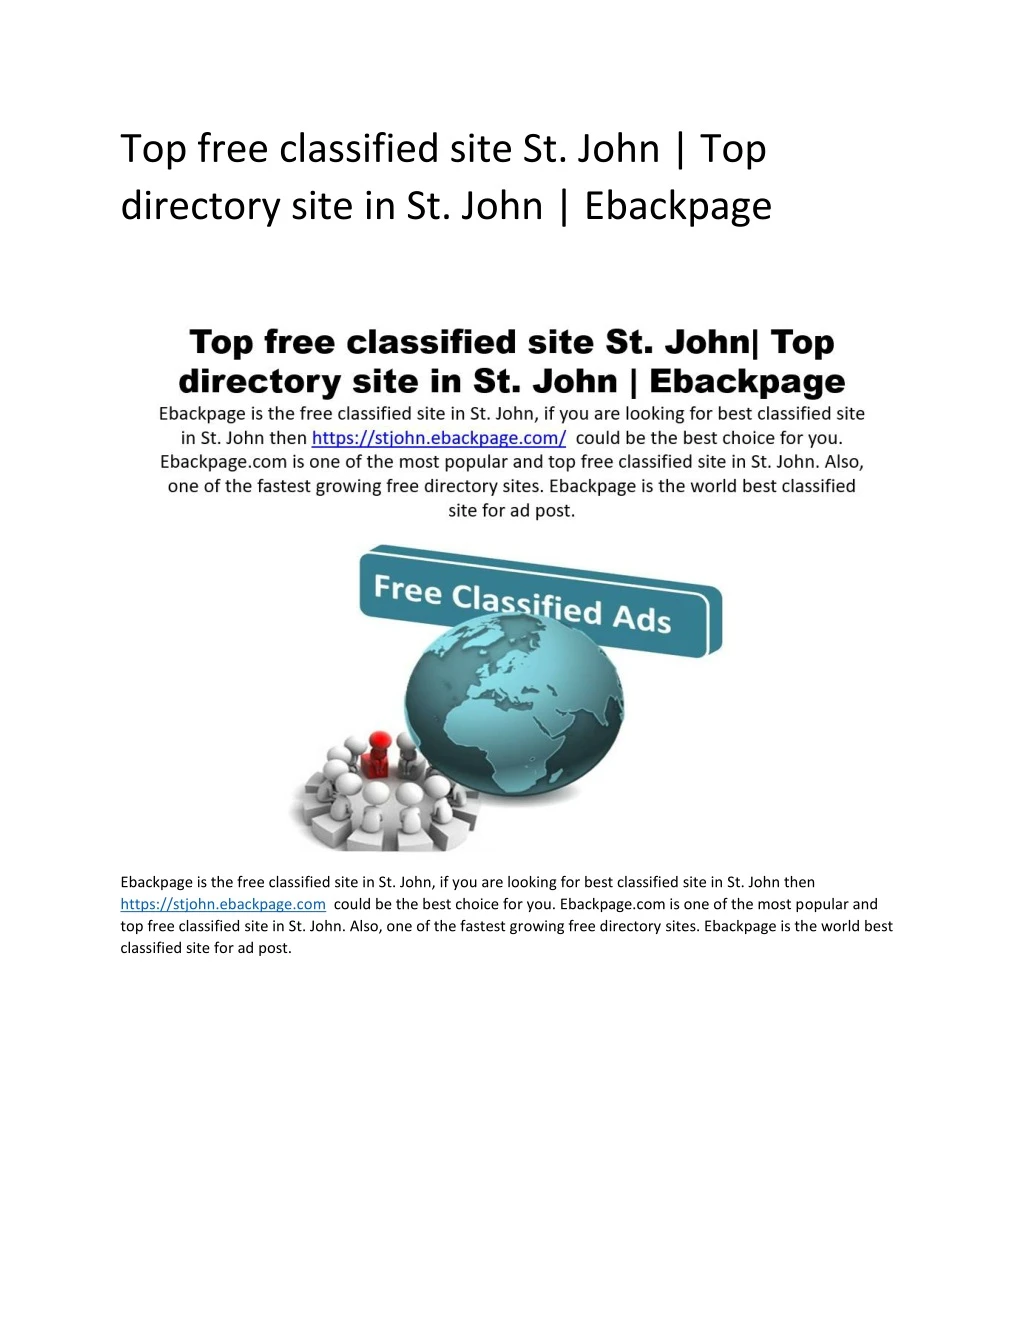 top free classified site st john top directory